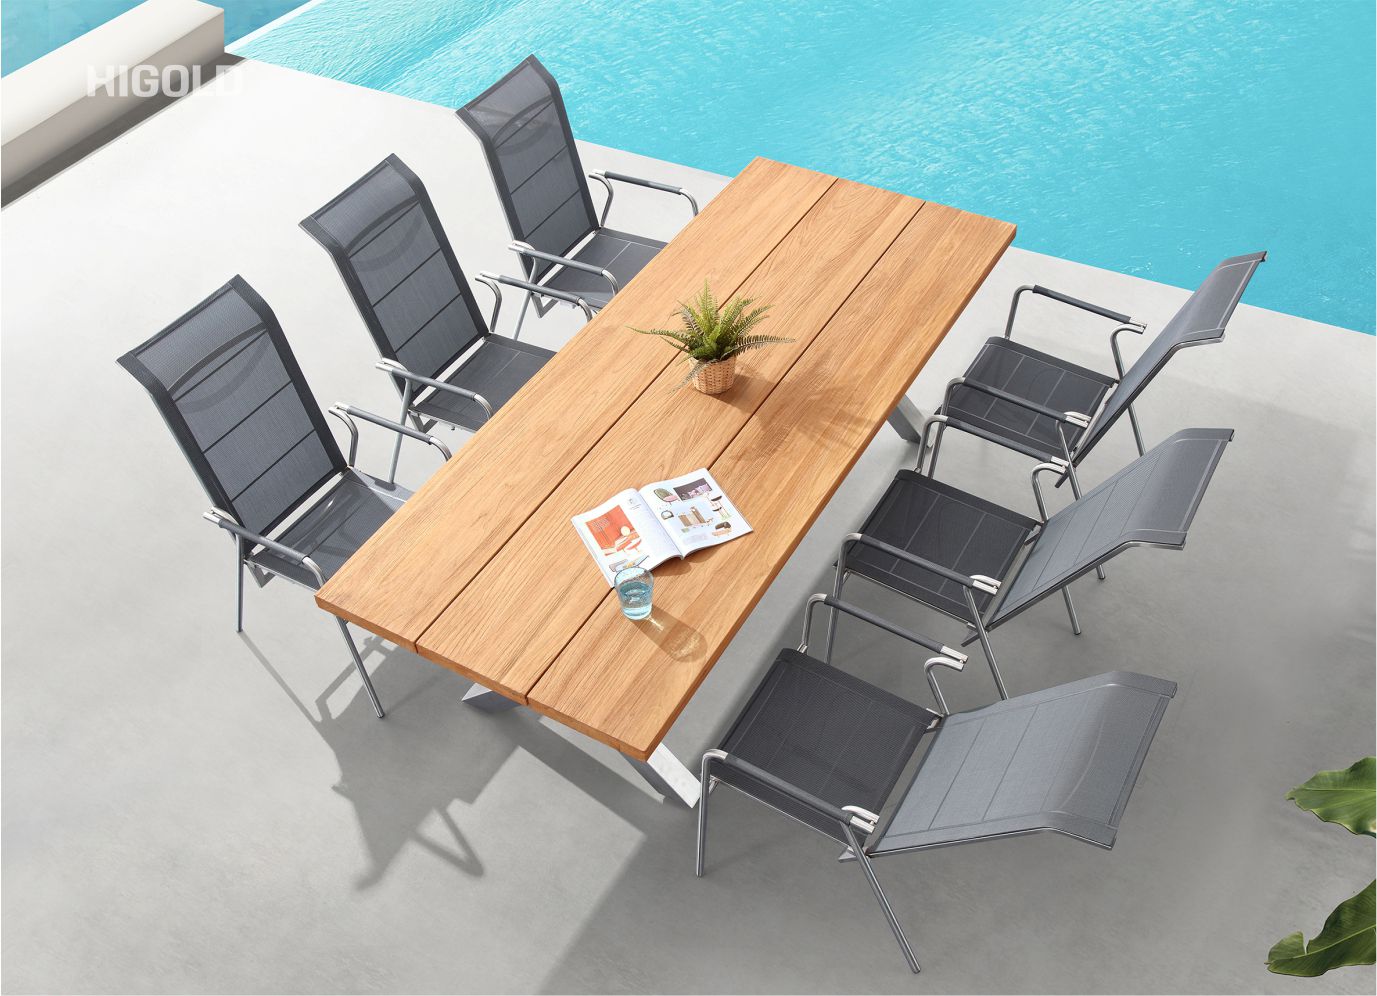 Pioneer 2.0 outdoor dining set for 6 grey tabletop